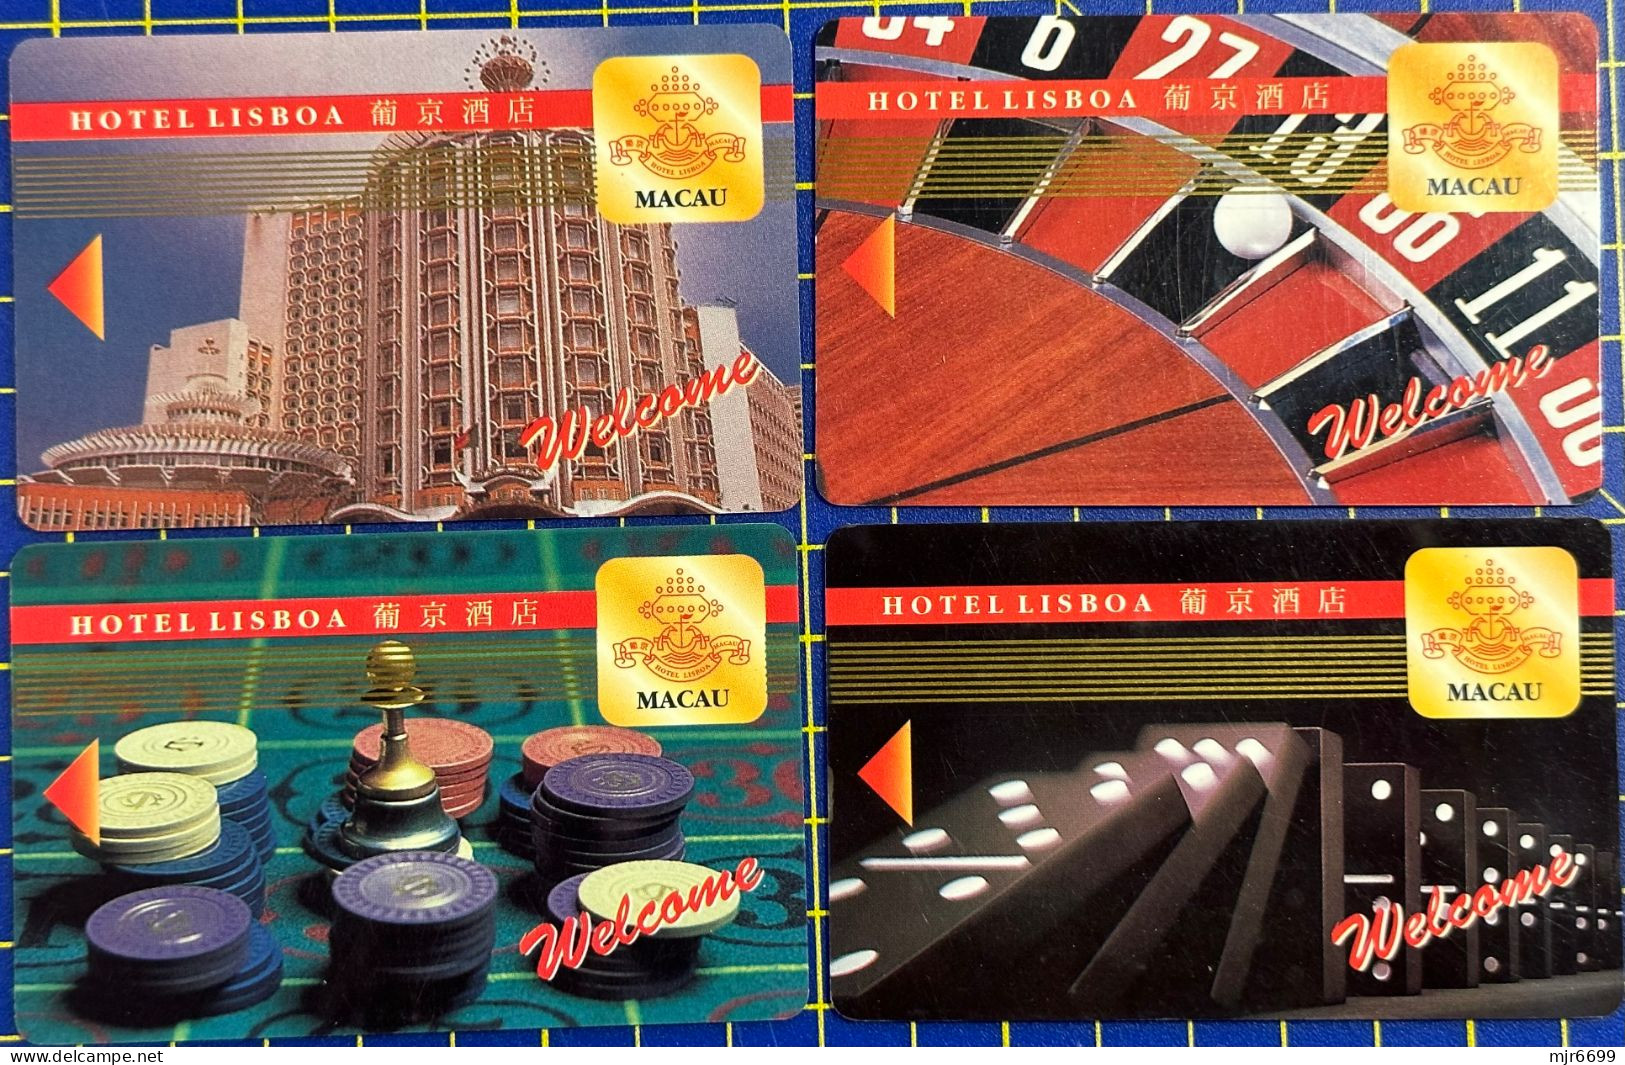 SET OF 4, HOTEL LISBOA ELECTRONIC ROOM KEY CARDS, GAMBLING THINGS RELATED, USED, CLEARING STOCK, C PICTURES. - Macau